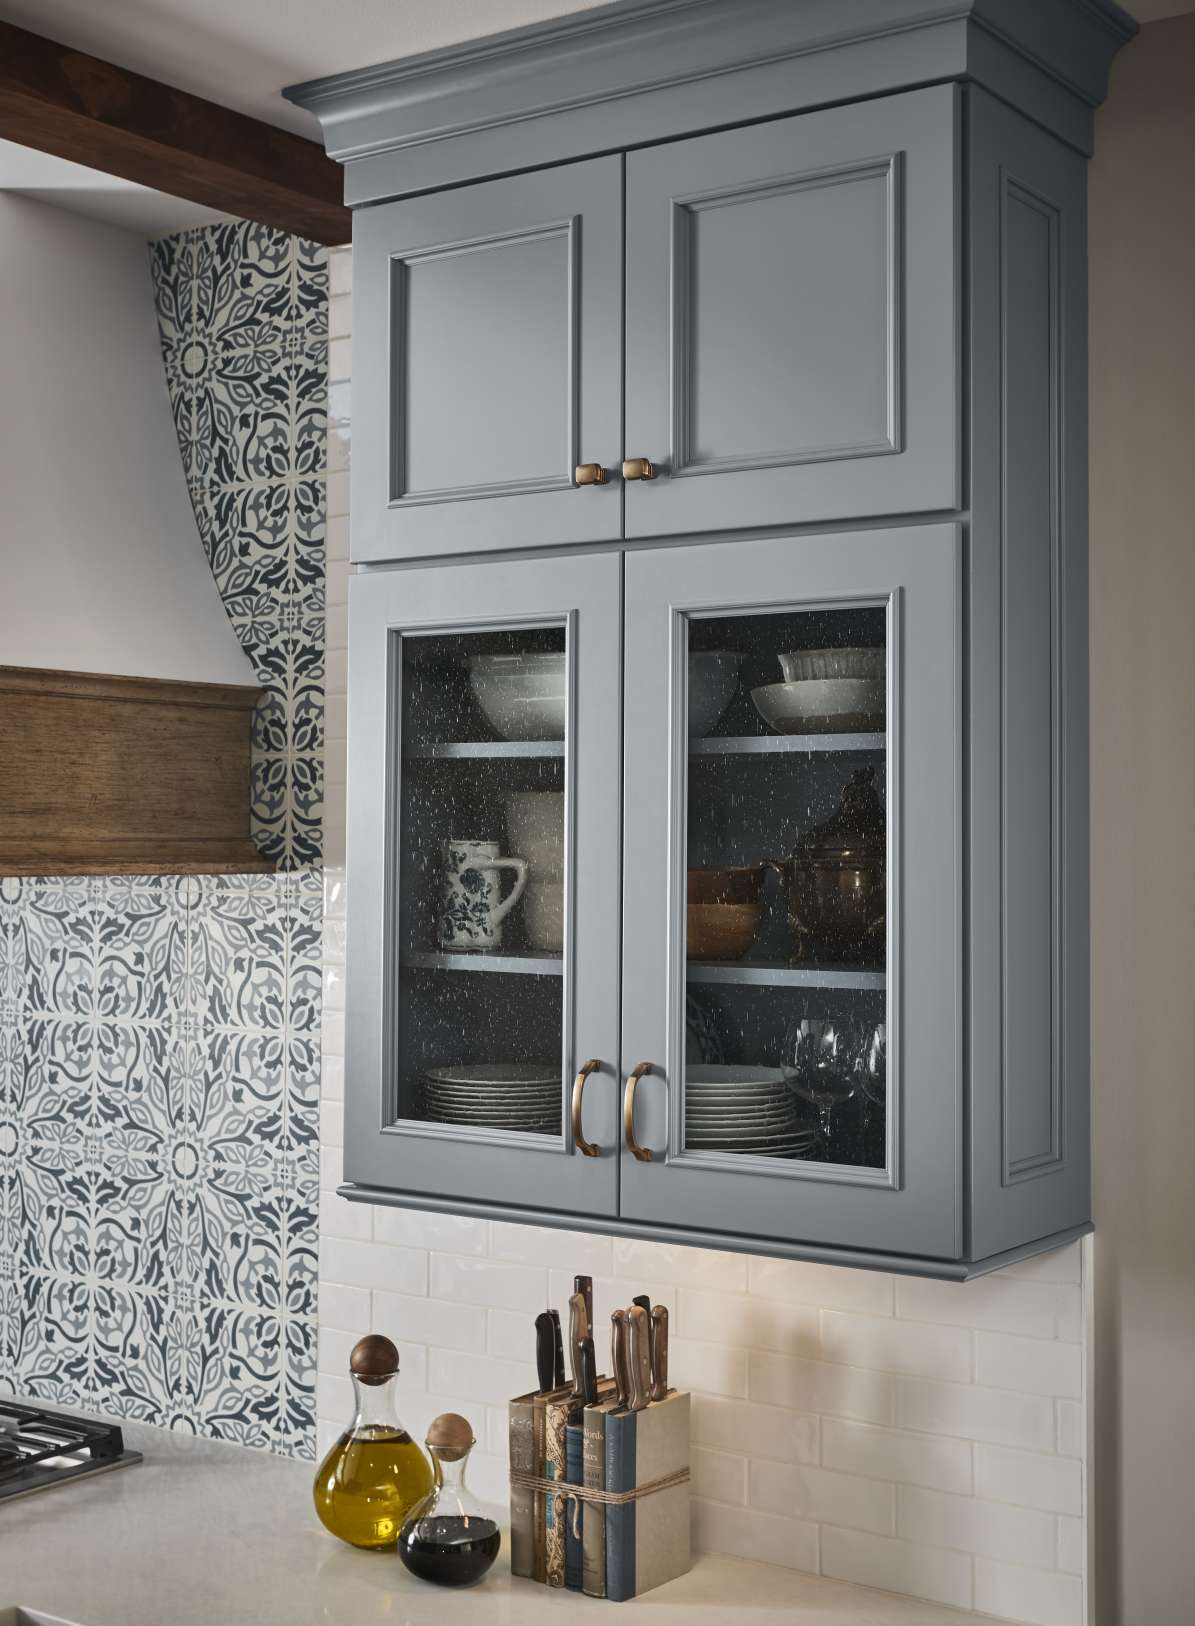 Medallion Cabinetry - Modern English Cottage